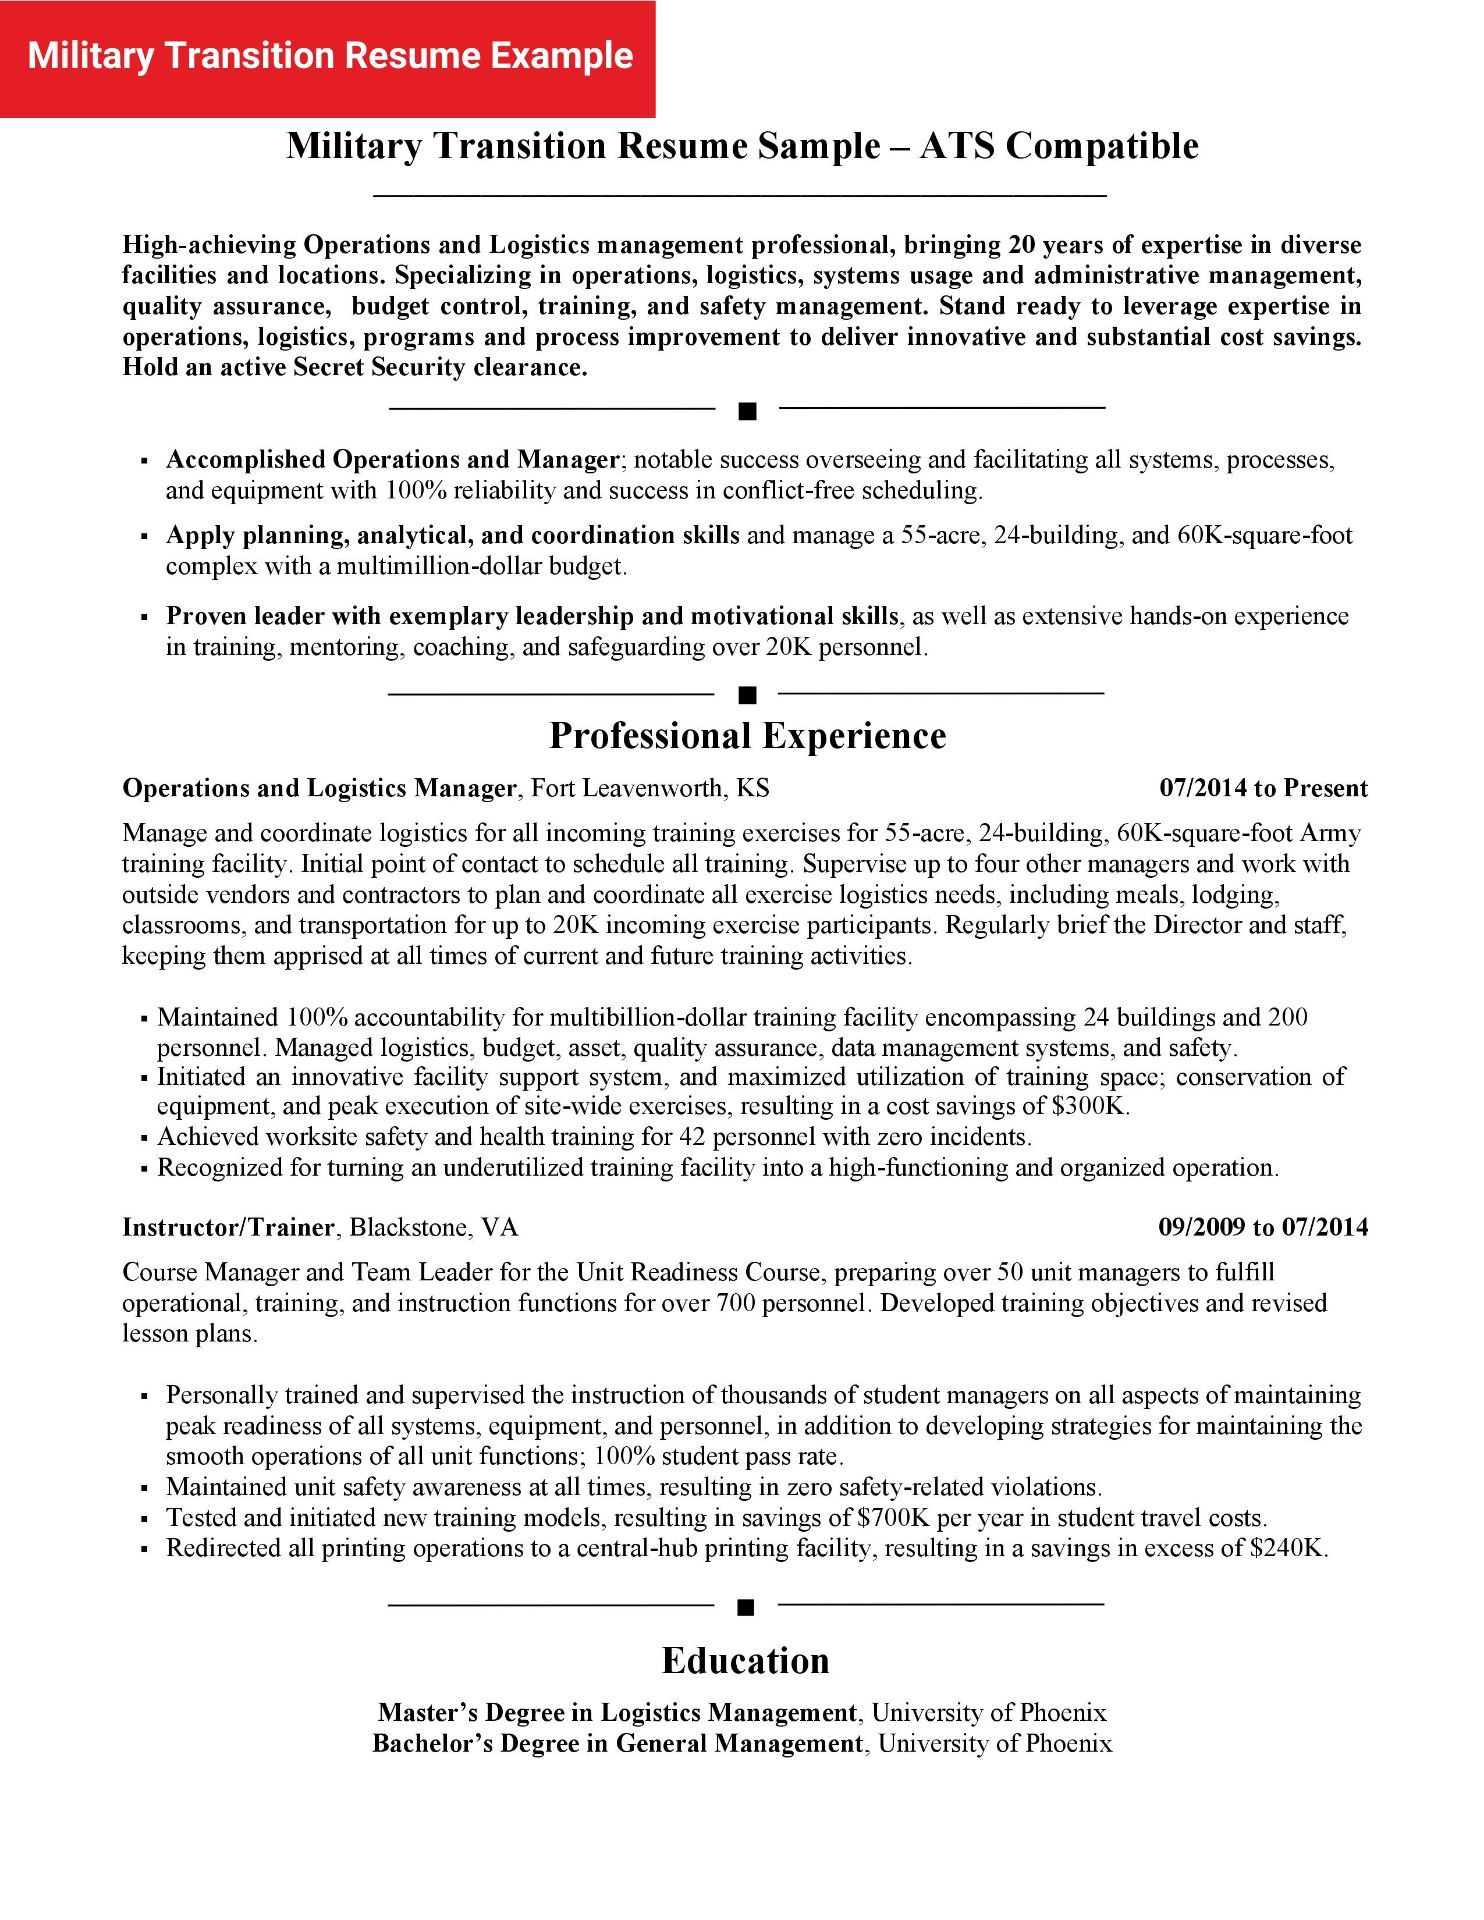 Sample Resume Duties Accomplishments and Related Skills 7 Free Federal Resume Samples & Writing Tips and Trends